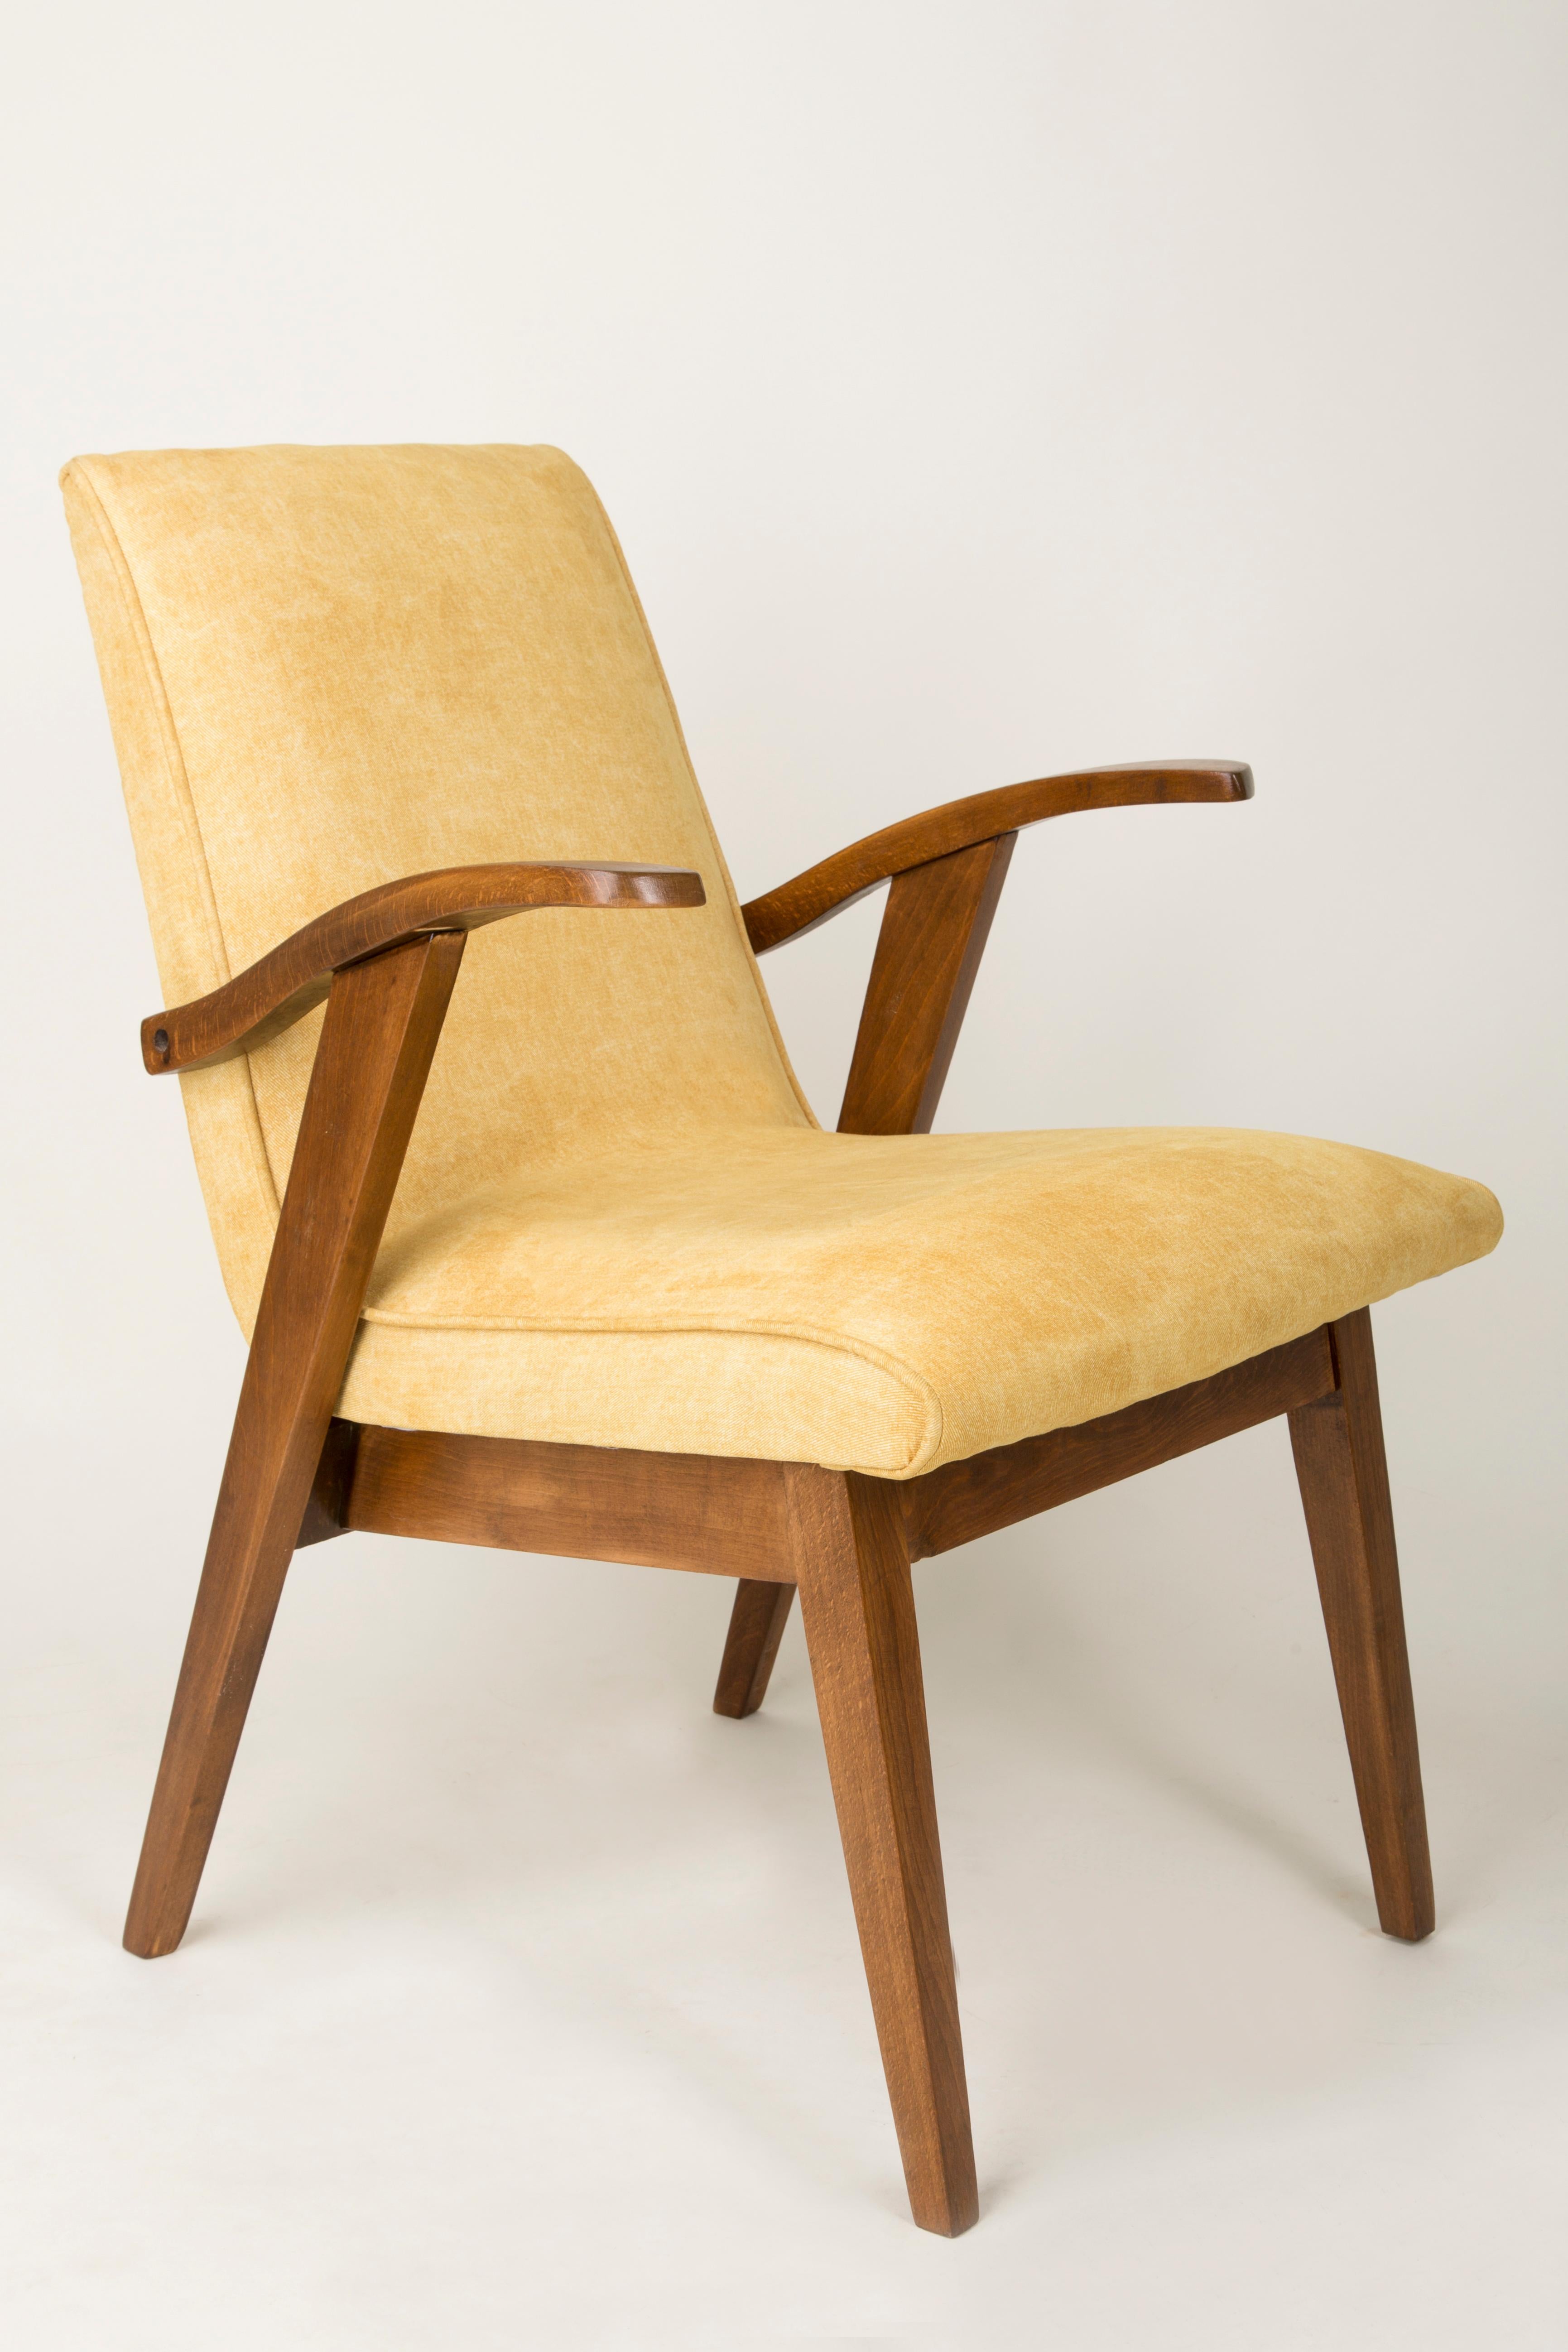 Hand-Crafted Set of Two Vintage Yellow Chairs, 1960s For Sale